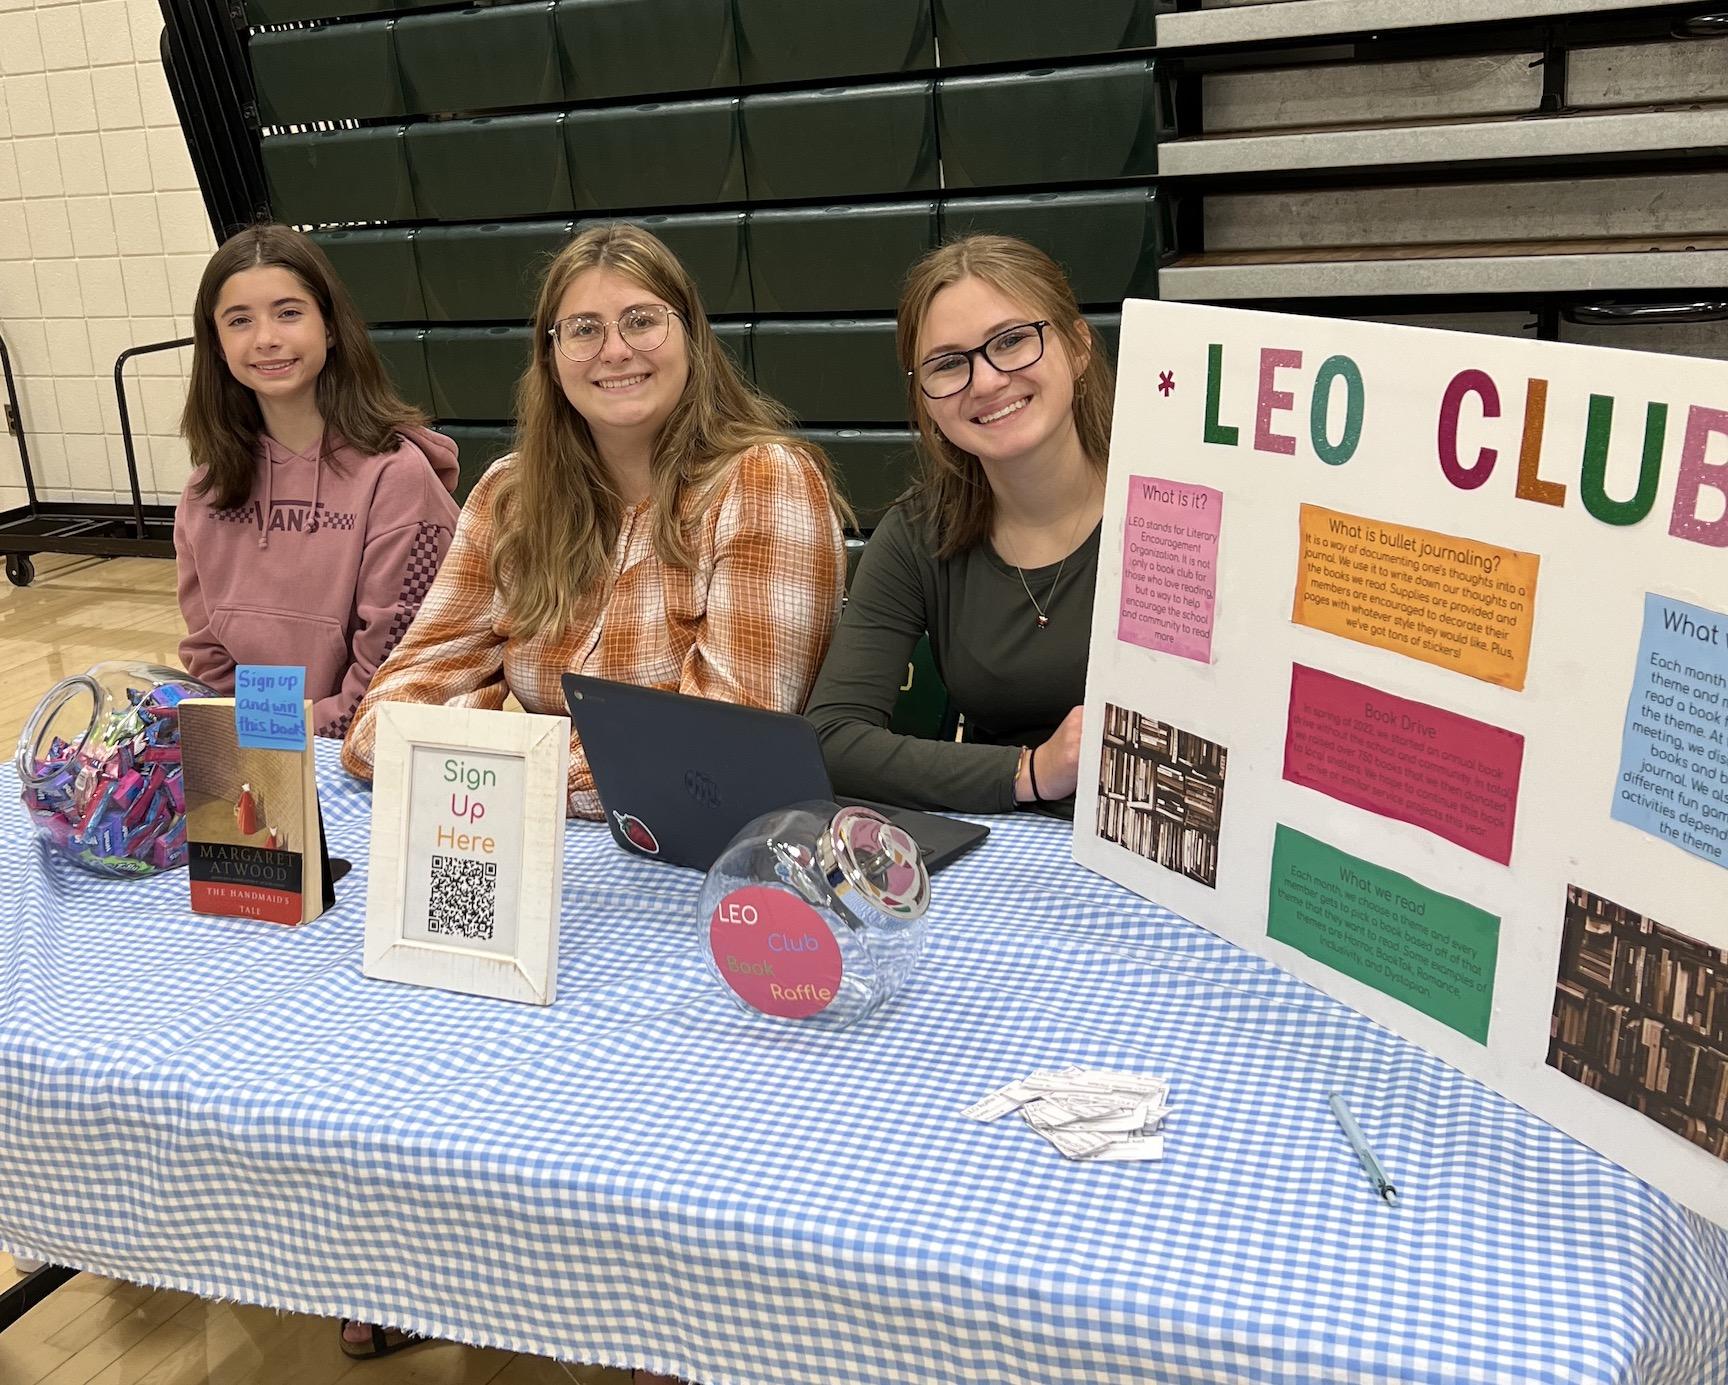 The Leo Club spoke with potential new members